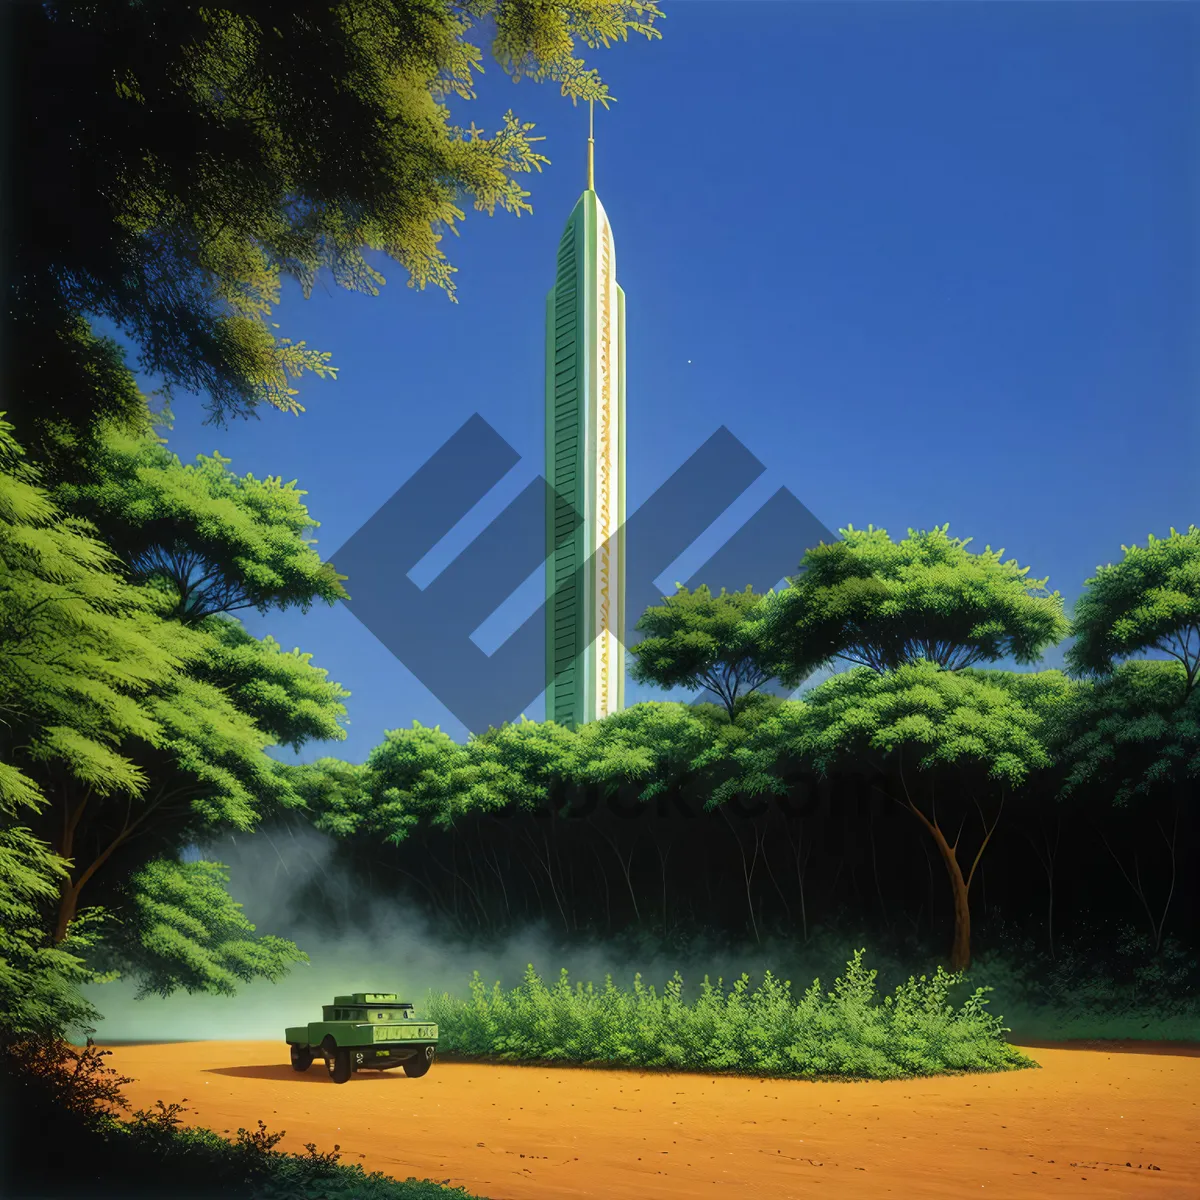 Picture of Skyline Obelisk: Iconic City Landmark with Architectural Fountain